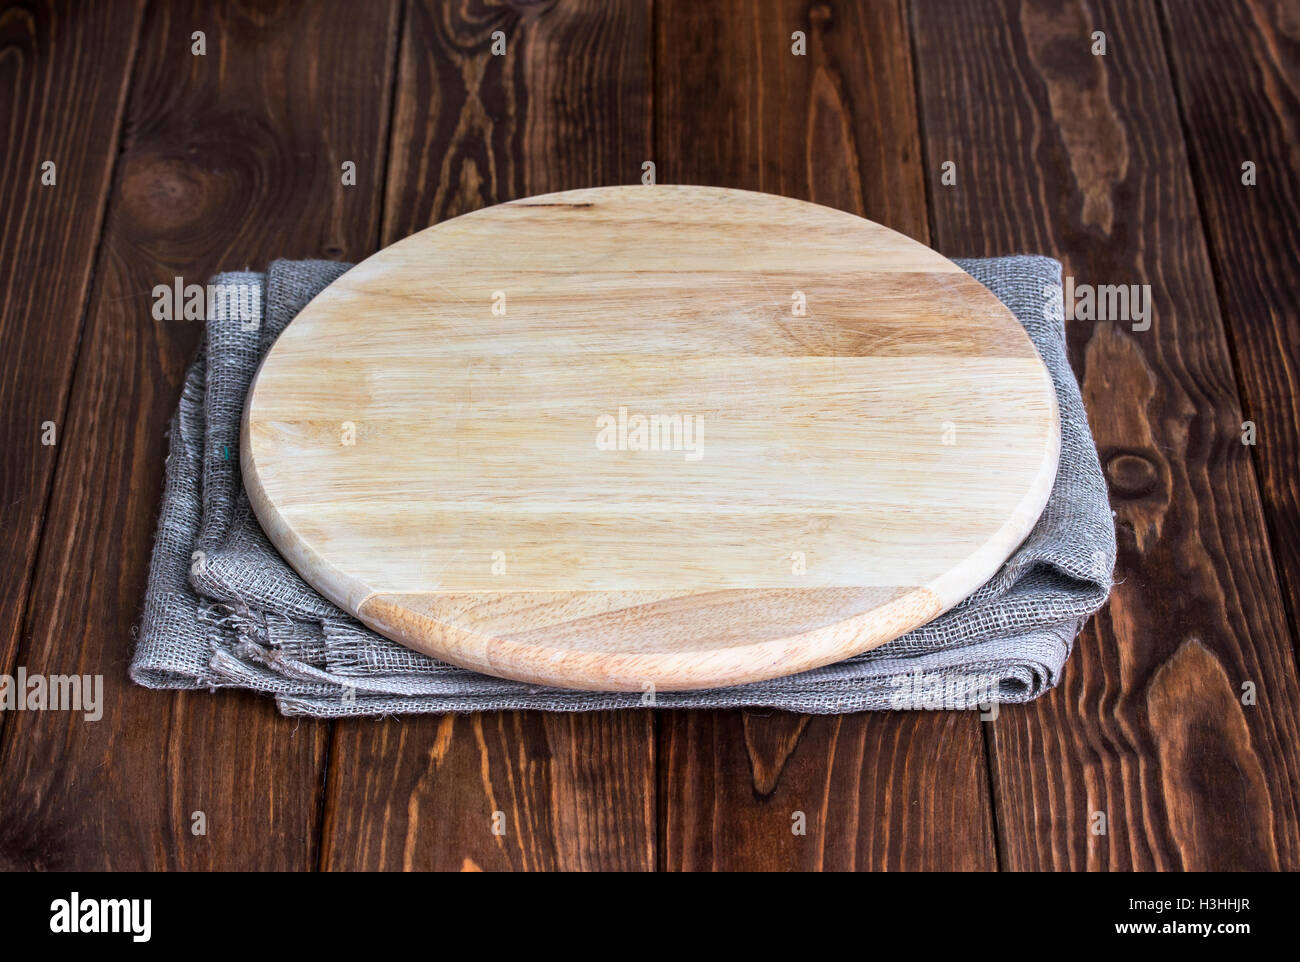 Table with round cutting board for product montage Stock Photo